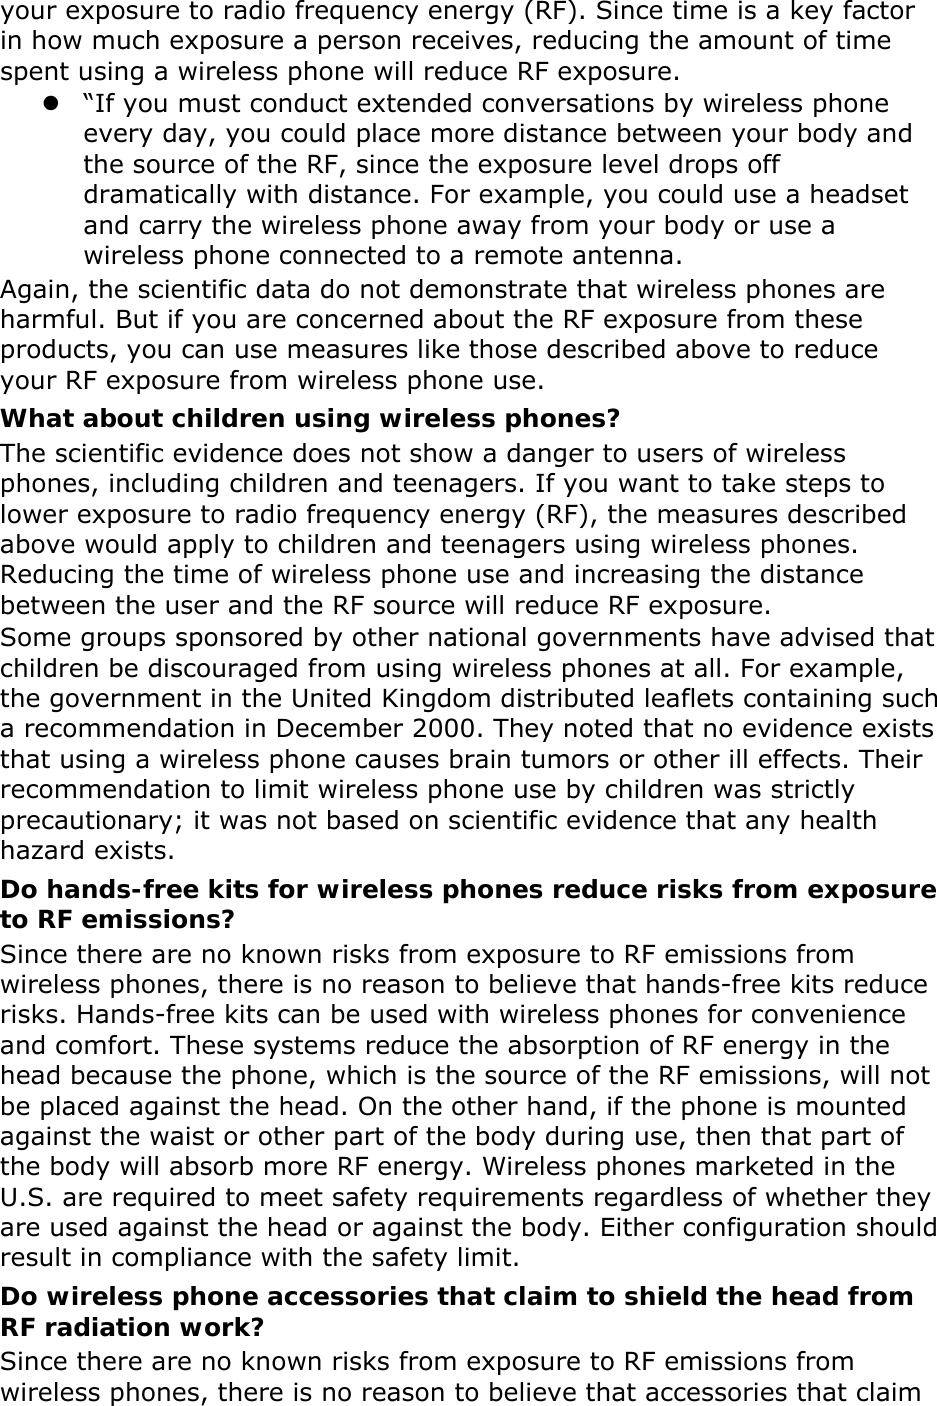 your exposure to radio frequency energy (RF). Since time is a key factor in how much exposure a person receives, reducing the amount of time spent using a wireless phone will reduce RF exposure.  “If you must conduct extended conversations by wireless phone every day, you could place more distance between your body and the source of the RF, since the exposure level drops off dramatically with distance. For example, you could use a headset and carry the wireless phone away from your body or use a wireless phone connected to a remote antenna. Again, the scientific data do not demonstrate that wireless phones are harmful. But if you are concerned about the RF exposure from these products, you can use measures like those described above to reduce your RF exposure from wireless phone use. What about children using wireless phones? The scientific evidence does not show a danger to users of wireless phones, including children and teenagers. If you want to take steps to lower exposure to radio frequency energy (RF), the measures described above would apply to children and teenagers using wireless phones. Reducing the time of wireless phone use and increasing the distance between the user and the RF source will reduce RF exposure. Some groups sponsored by other national governments have advised that children be discouraged from using wireless phones at all. For example, the government in the United Kingdom distributed leaflets containing such a recommendation in December 2000. They noted that no evidence exists that using a wireless phone causes brain tumors or other ill effects. Their recommendation to limit wireless phone use by children was strictly precautionary; it was not based on scientific evidence that any health hazard exists.   Do hands-free kits for wireless phones reduce risks from exposure to RF emissions? Since there are no known risks from exposure to RF emissions from wireless phones, there is no reason to believe that hands-free kits reduce risks. Hands-free kits can be used with wireless phones for convenience and comfort. These systems reduce the absorption of RF energy in the head because the phone, which is the source of the RF emissions, will not be placed against the head. On the other hand, if the phone is mounted against the waist or other part of the body during use, then that part of the body will absorb more RF energy. Wireless phones marketed in the U.S. are required to meet safety requirements regardless of whether they are used against the head or against the body. Either configuration should result in compliance with the safety limit. Do wireless phone accessories that claim to shield the head from RF radiation work? Since there are no known risks from exposure to RF emissions from wireless phones, there is no reason to believe that accessories that claim 